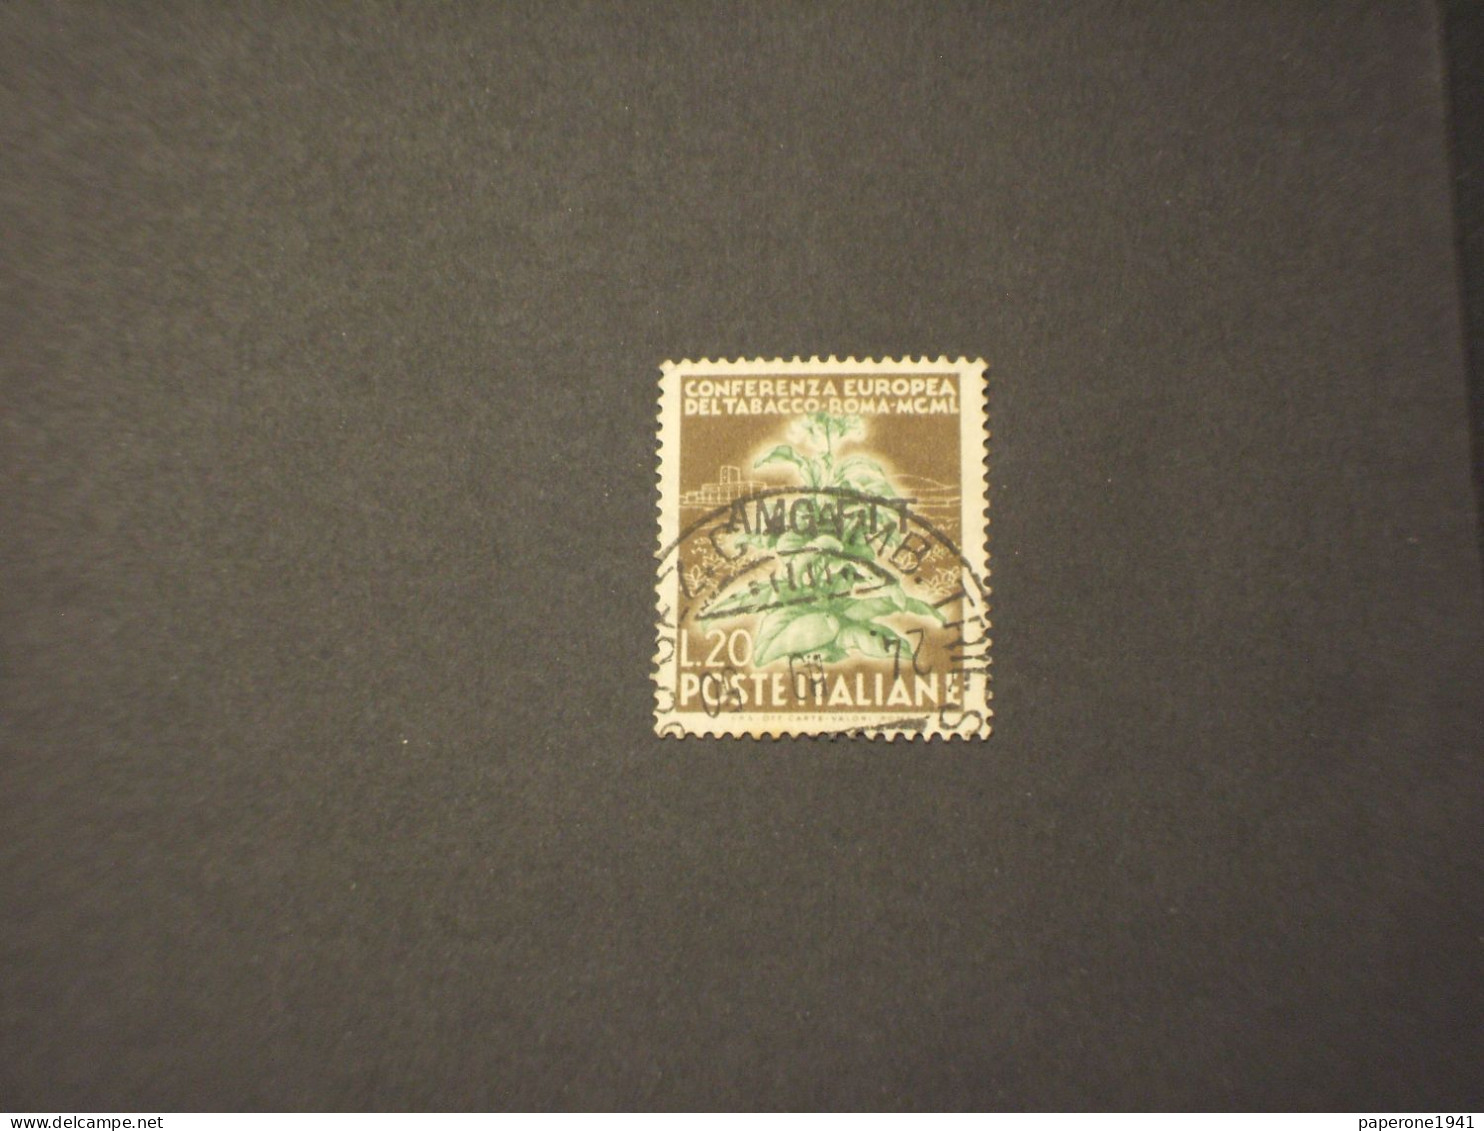 TRIESTE ZONA A-AMG-FTT - 1950 TABACCO L. 20 - TIMBRATO/USED - Oblitérés